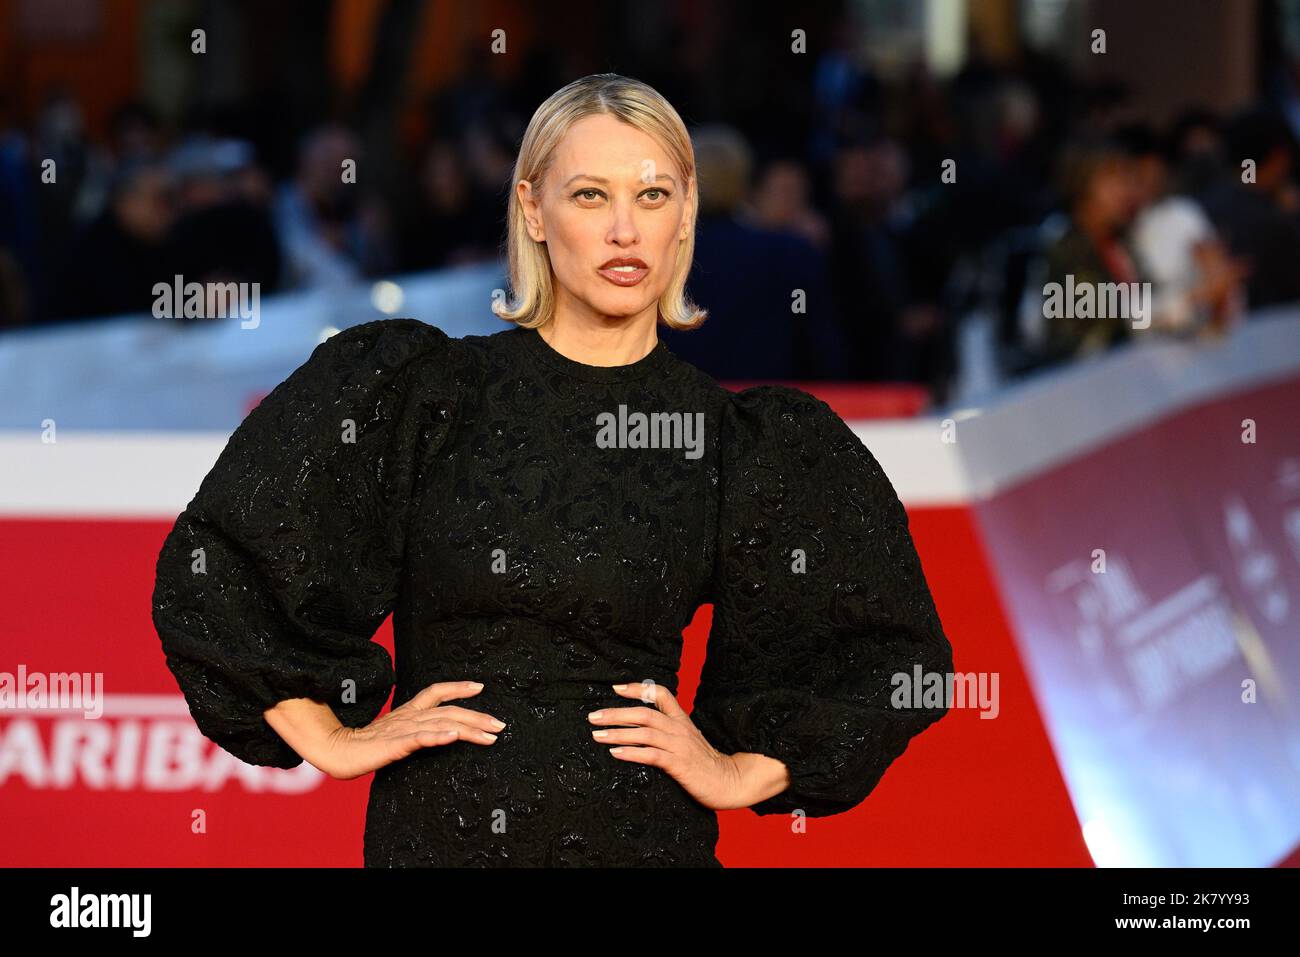 Roma, Italy. 18th Oct, 2022. ROME, ITALY - OCTOBER 18: Lea Mornar attends the photocall for 'La California' during the 17th Rome Film Festival at Auditorium Parco Della Musica on October 18, 2022 in Rome, Italy. Credit: Independent Photo Agency/Alamy Live News Stock Photo